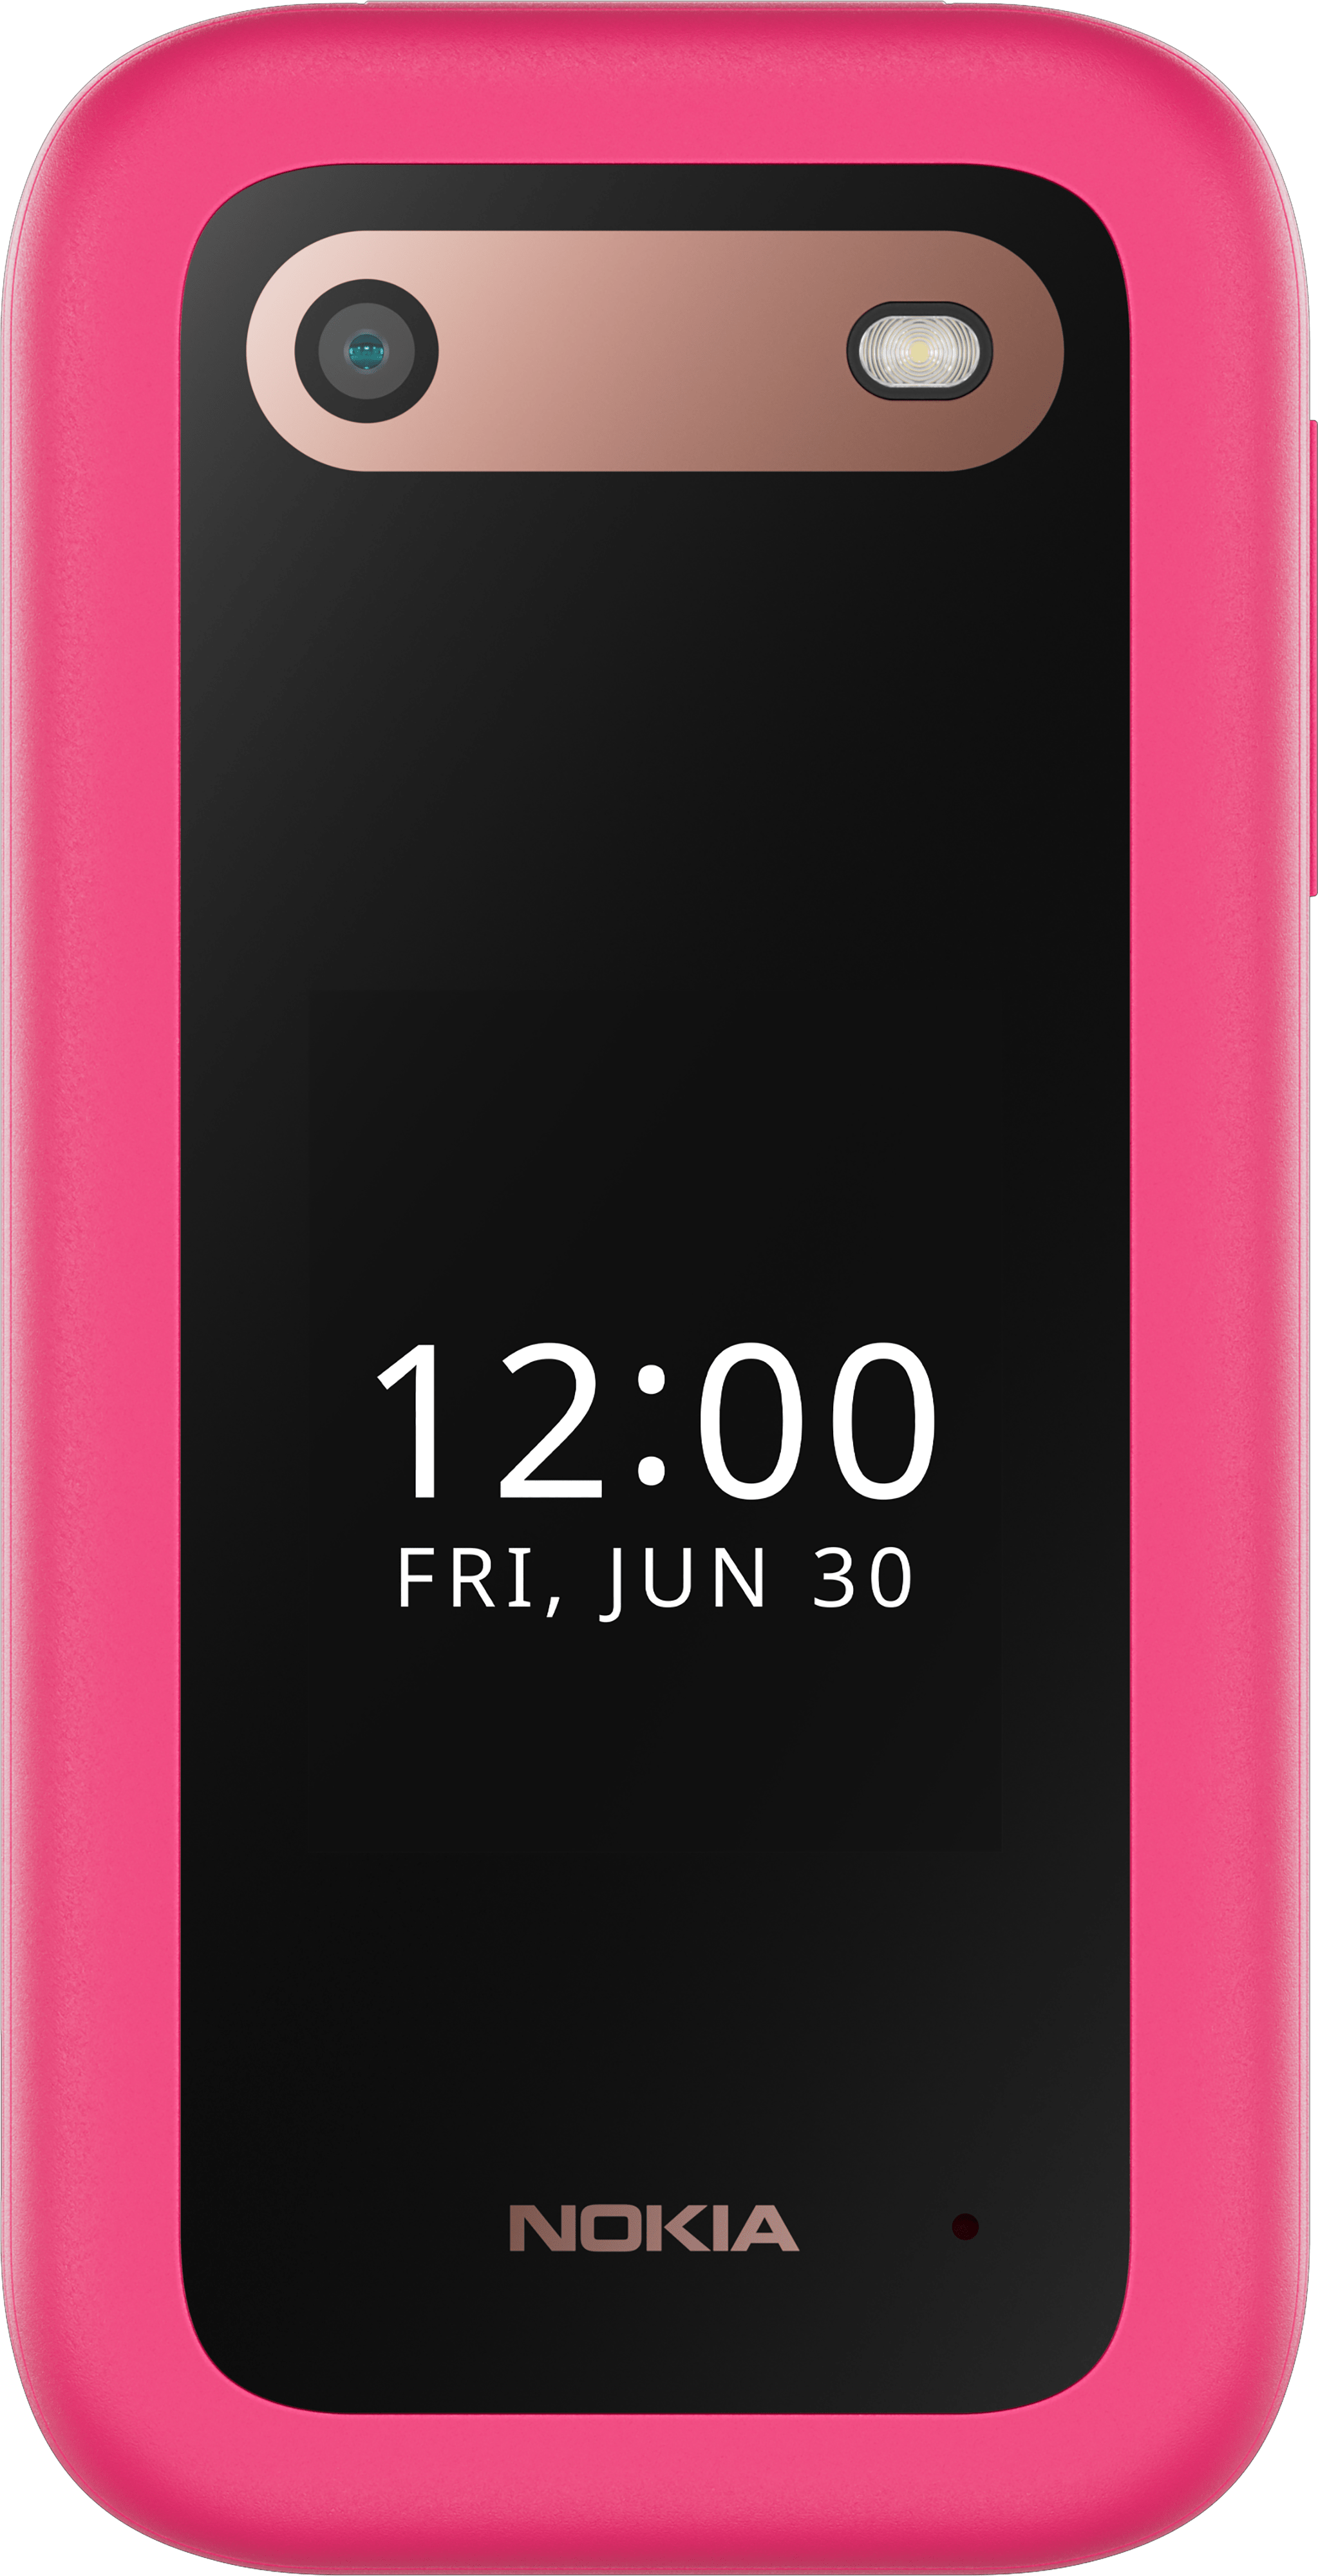 Repairable and fashionable: Nokia G42 5G goes So Pink